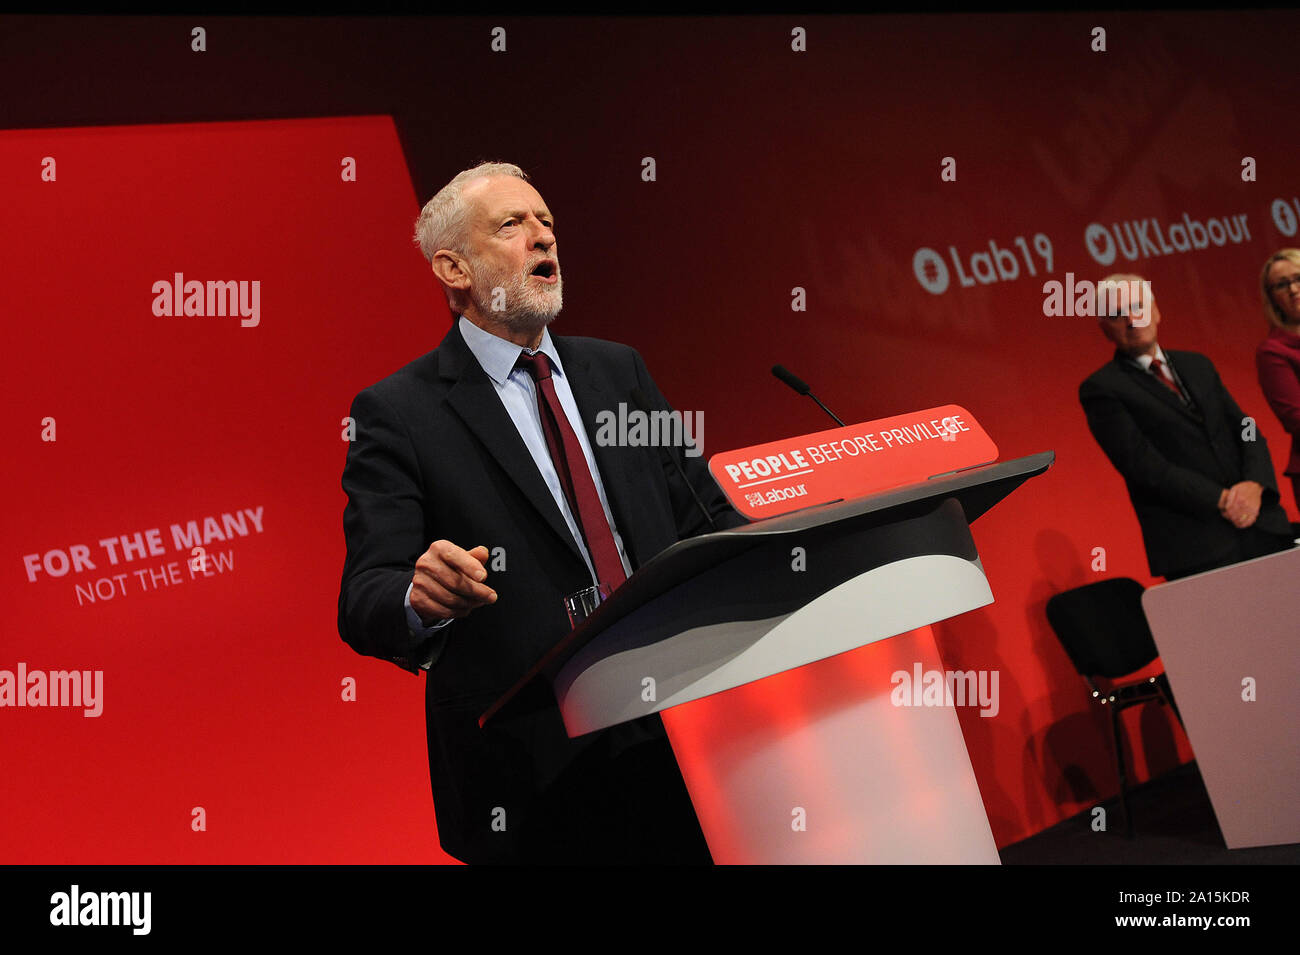 Brighton, UK. 24th Sep, 2019. Jeremy Corbyn Leader of the Labour Party, takes to the stage to announce the breaking news to delegates, that the Supreme Court has just ruled that the Conservative governmentsÕ proroguing of parliament was 'unlawful void and of no effectÕÕ. Jeremy Corbyn called on the Prime Minister, Boris Johnson 'to consider his position', during the fourth day of the Labour Party annual conference at the Brighton Centre. Credit: Kevin Hayes/Alamy Live News Stock Photo